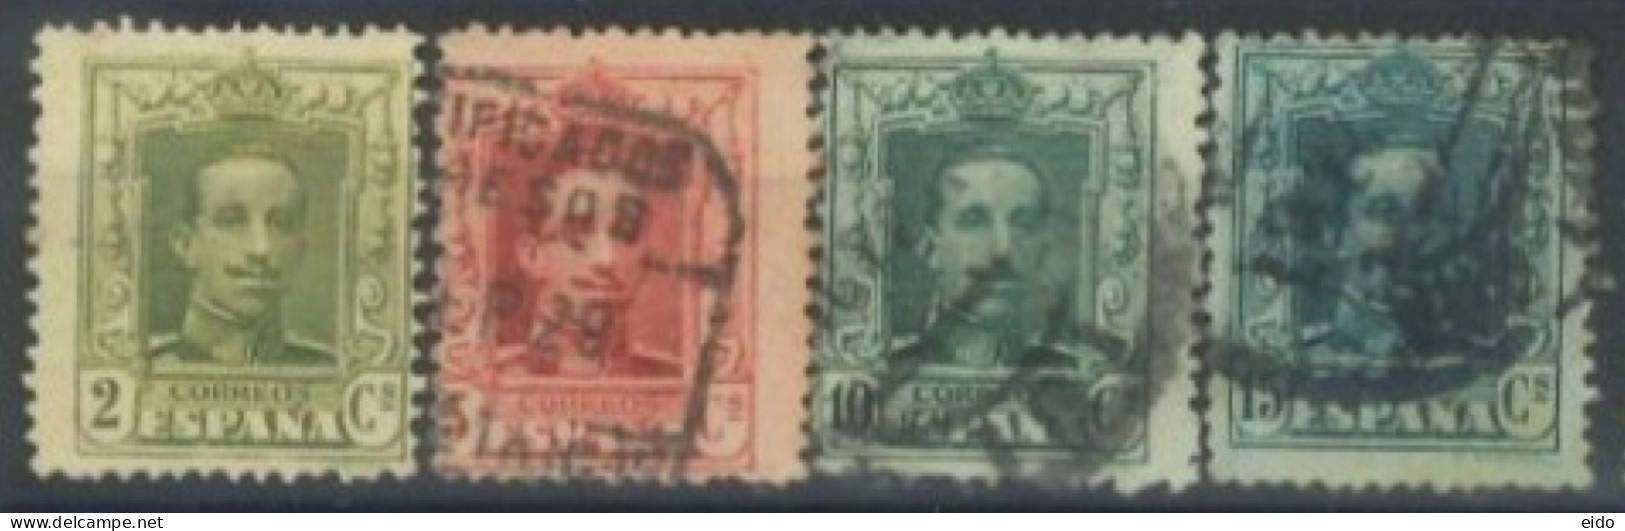 SPAIN, 1922/26, KING ALFONSO XIII STAMPS SET OF 4 # 331/32,335/36, USED. - Used Stamps